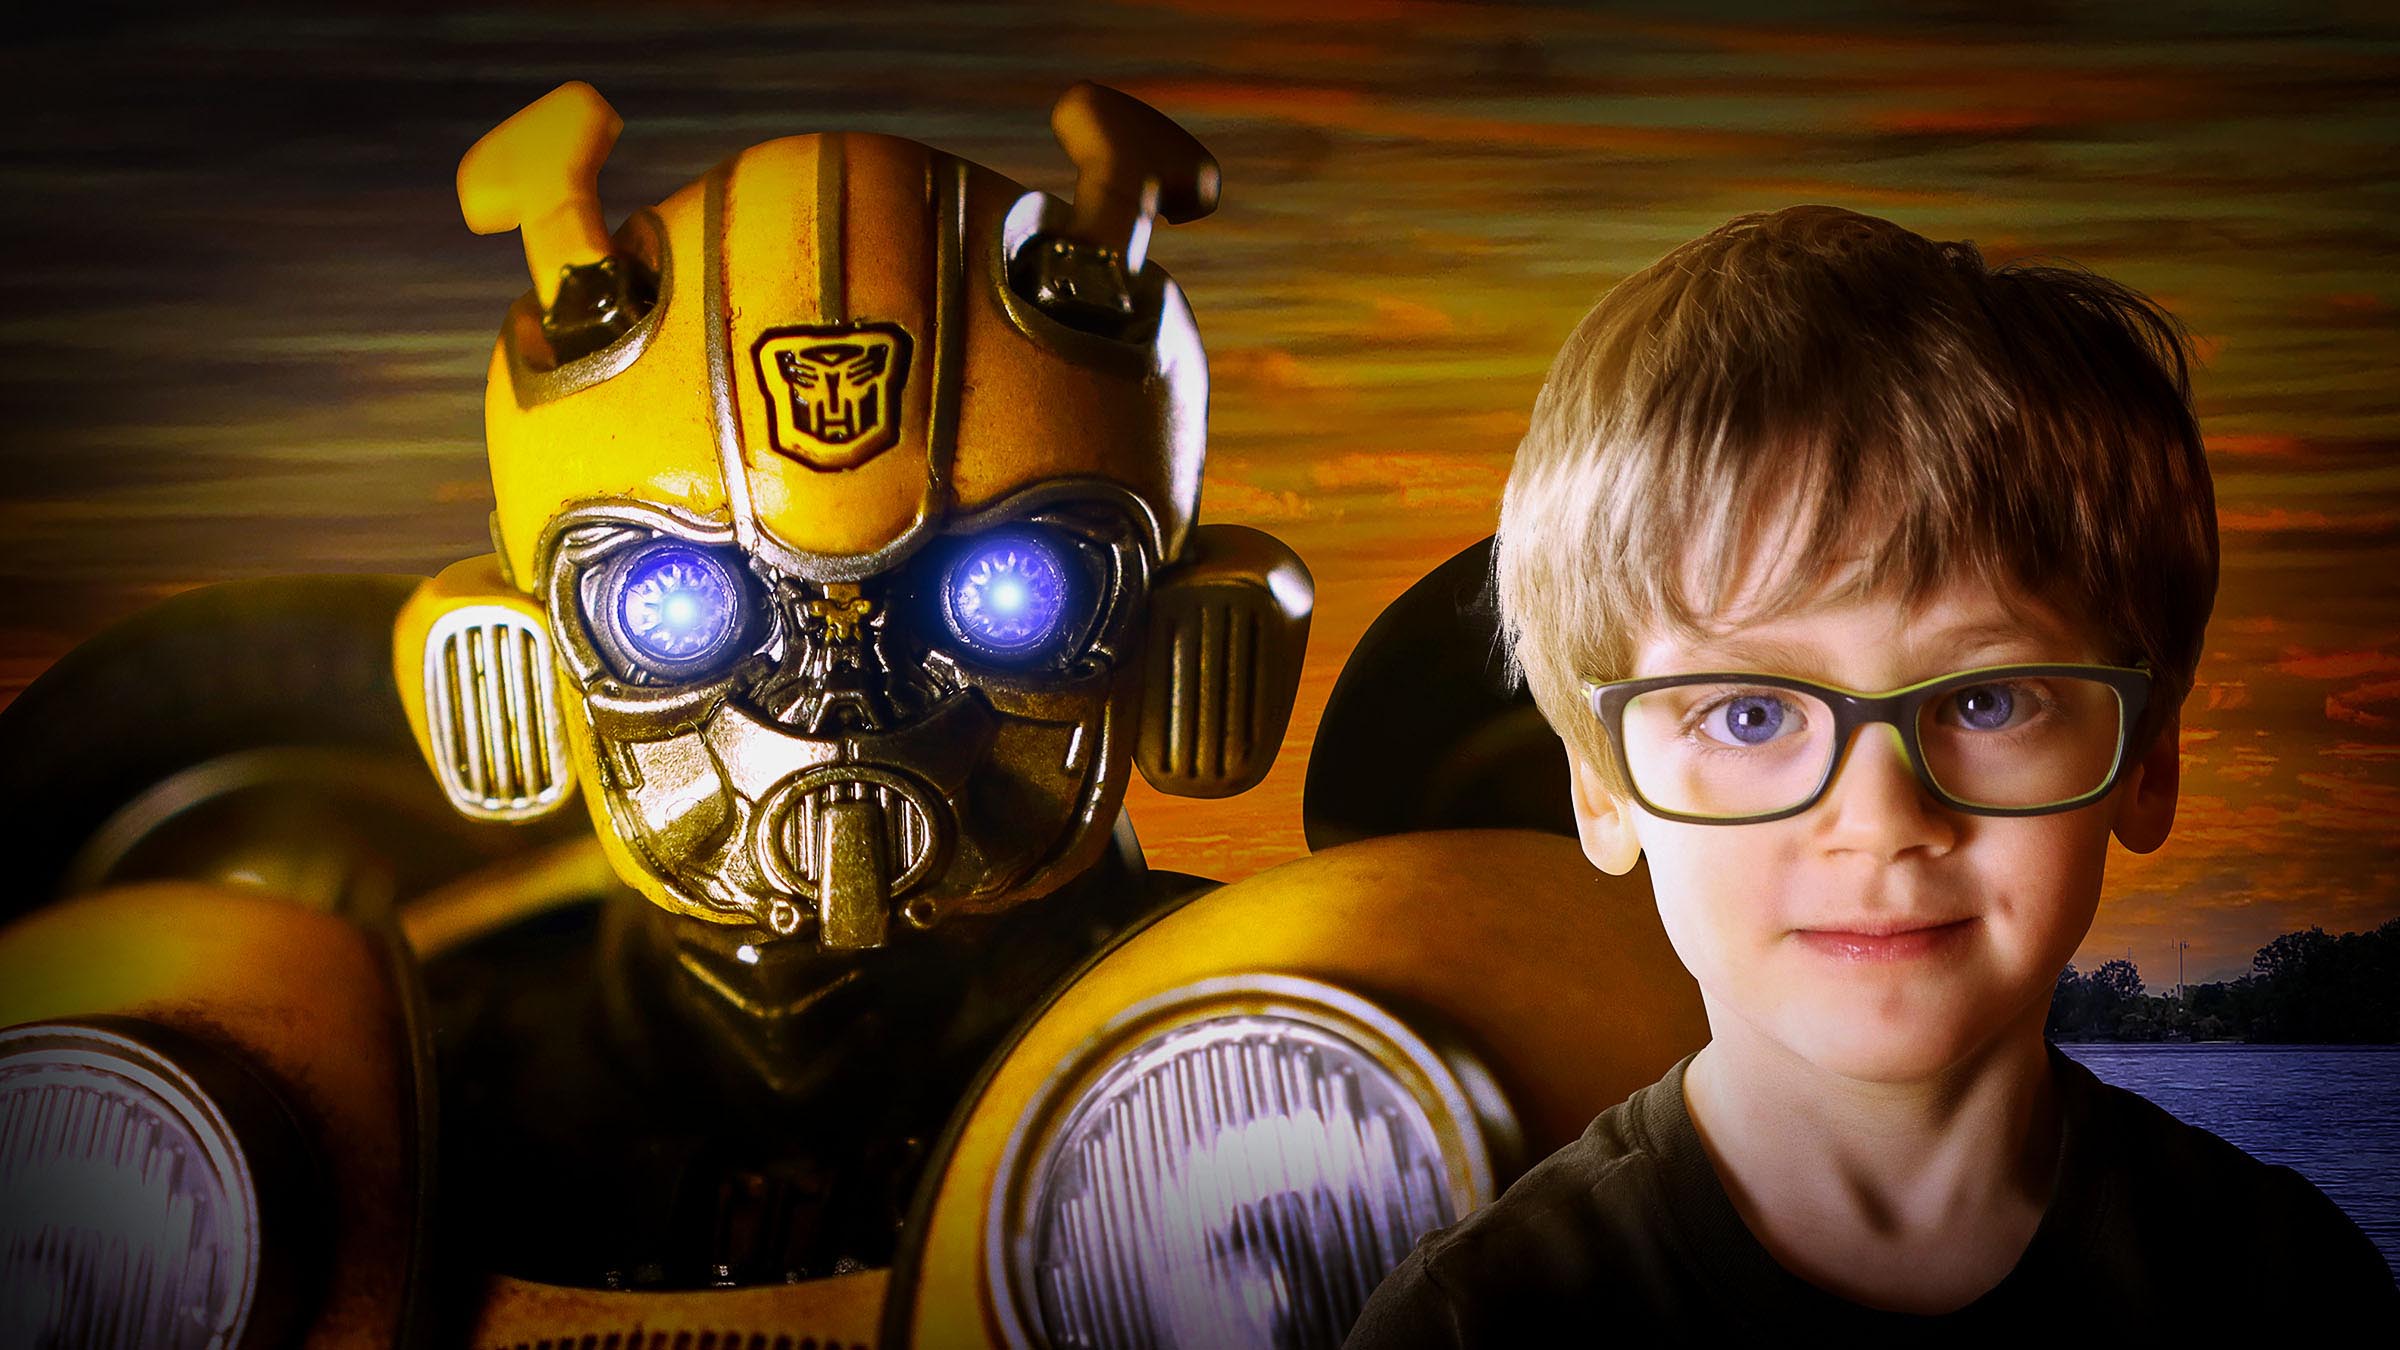 Composite of boy and Transformers Bumblebee close up of heads with blue and orange sky background by Vaudreuil-Soulanges and West Island of Montreal photographer Tobi Malette